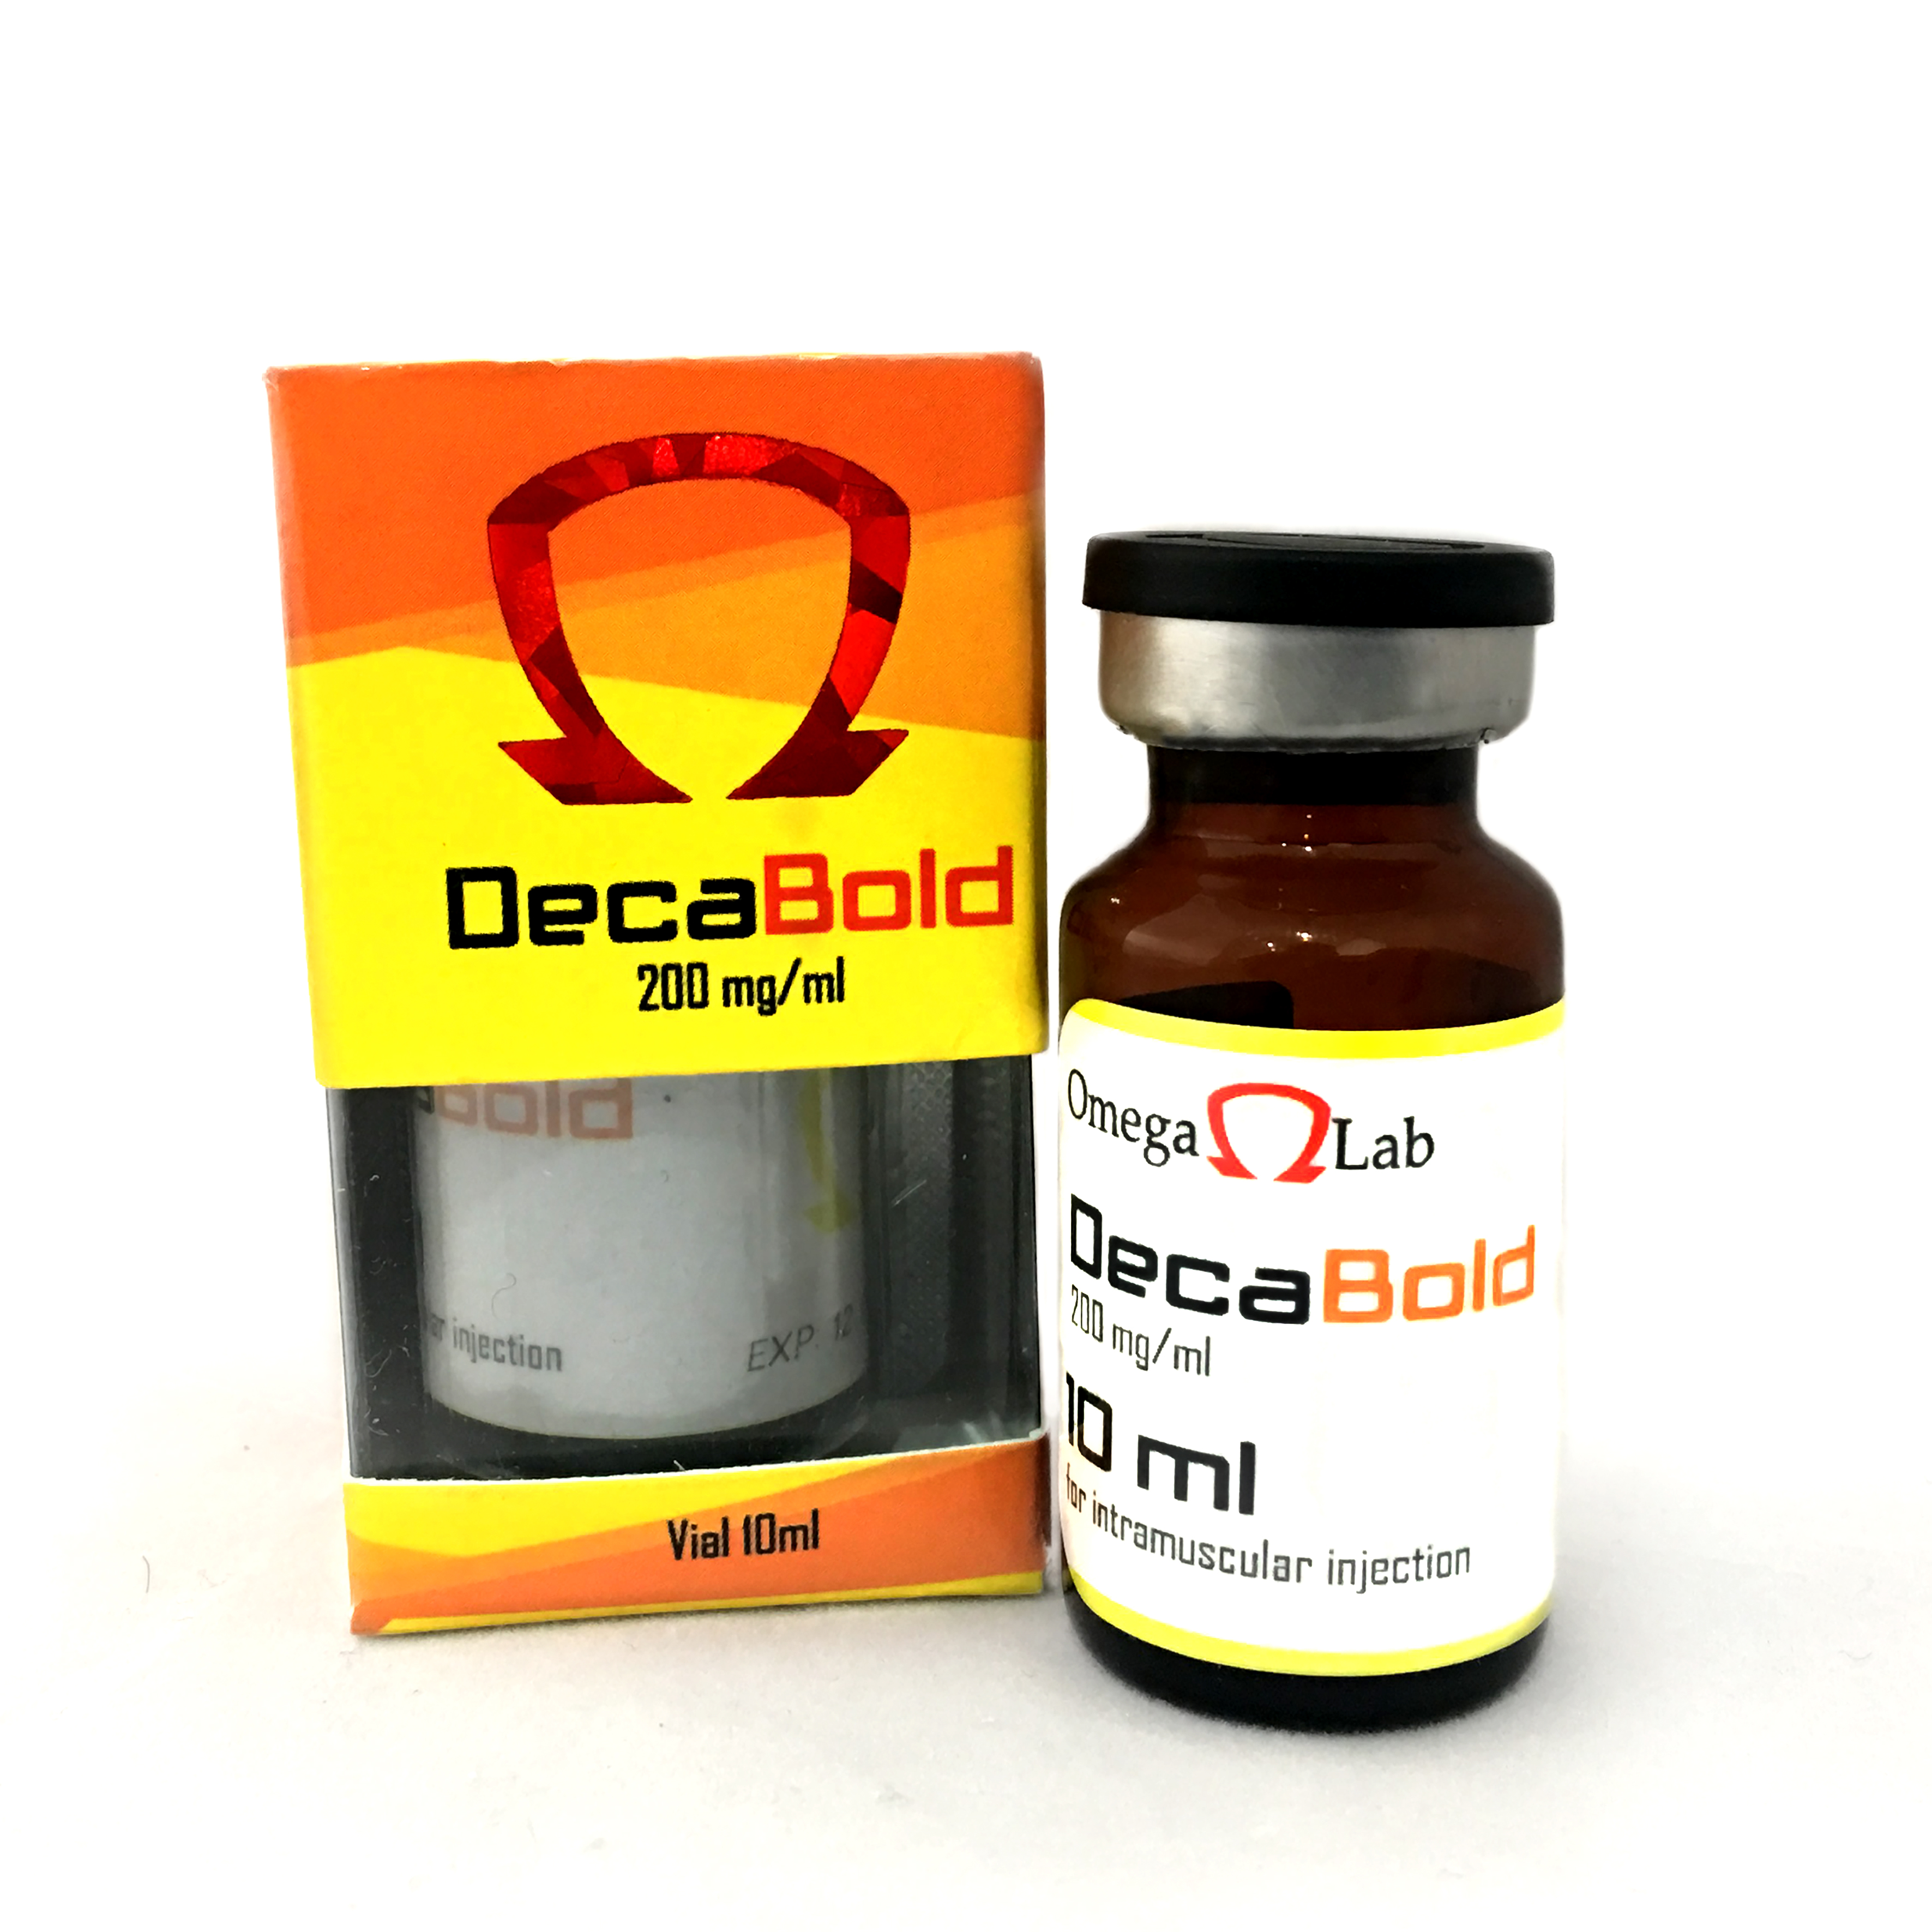 Nandrolone decanoate effects